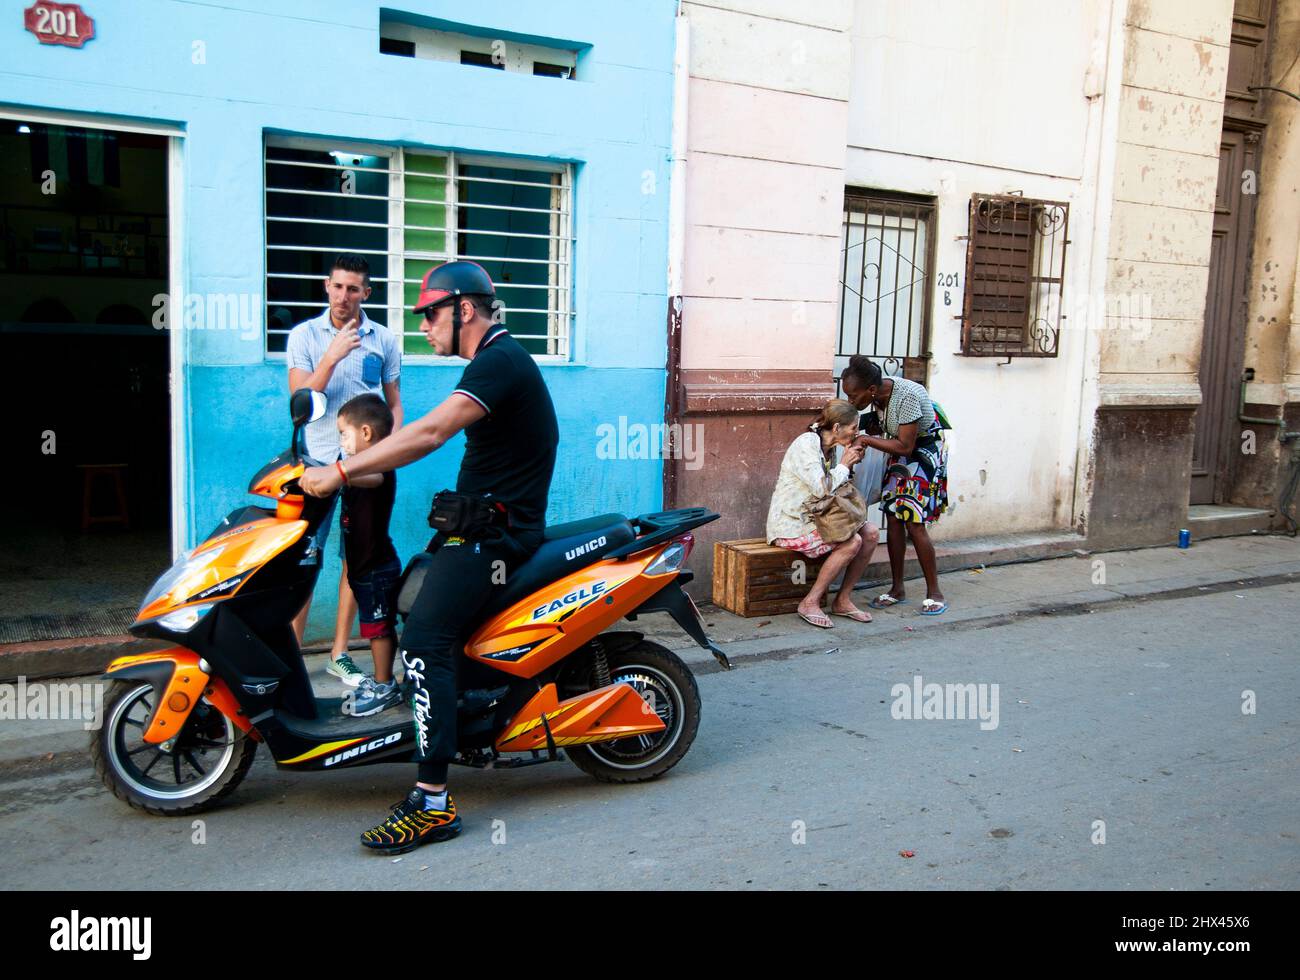 Two women embrace each other with a kiss while a man with his son play on a motorcycle in Havana, Cuba. Stock Photo